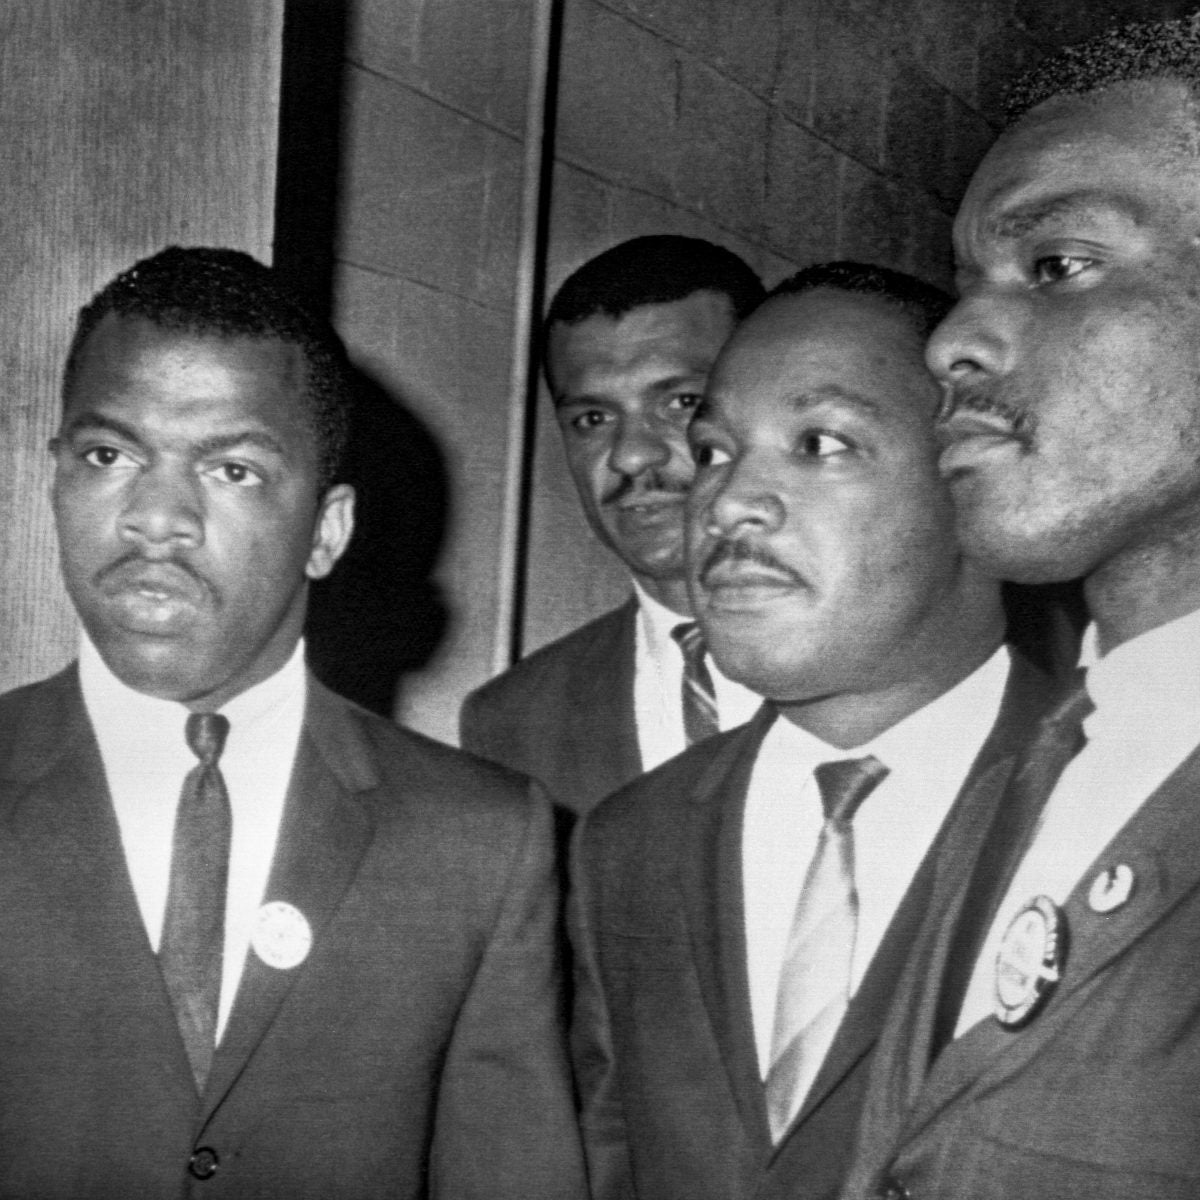 Martin Luther King Jr. with John Lewis at Mass Meeting in Nashville